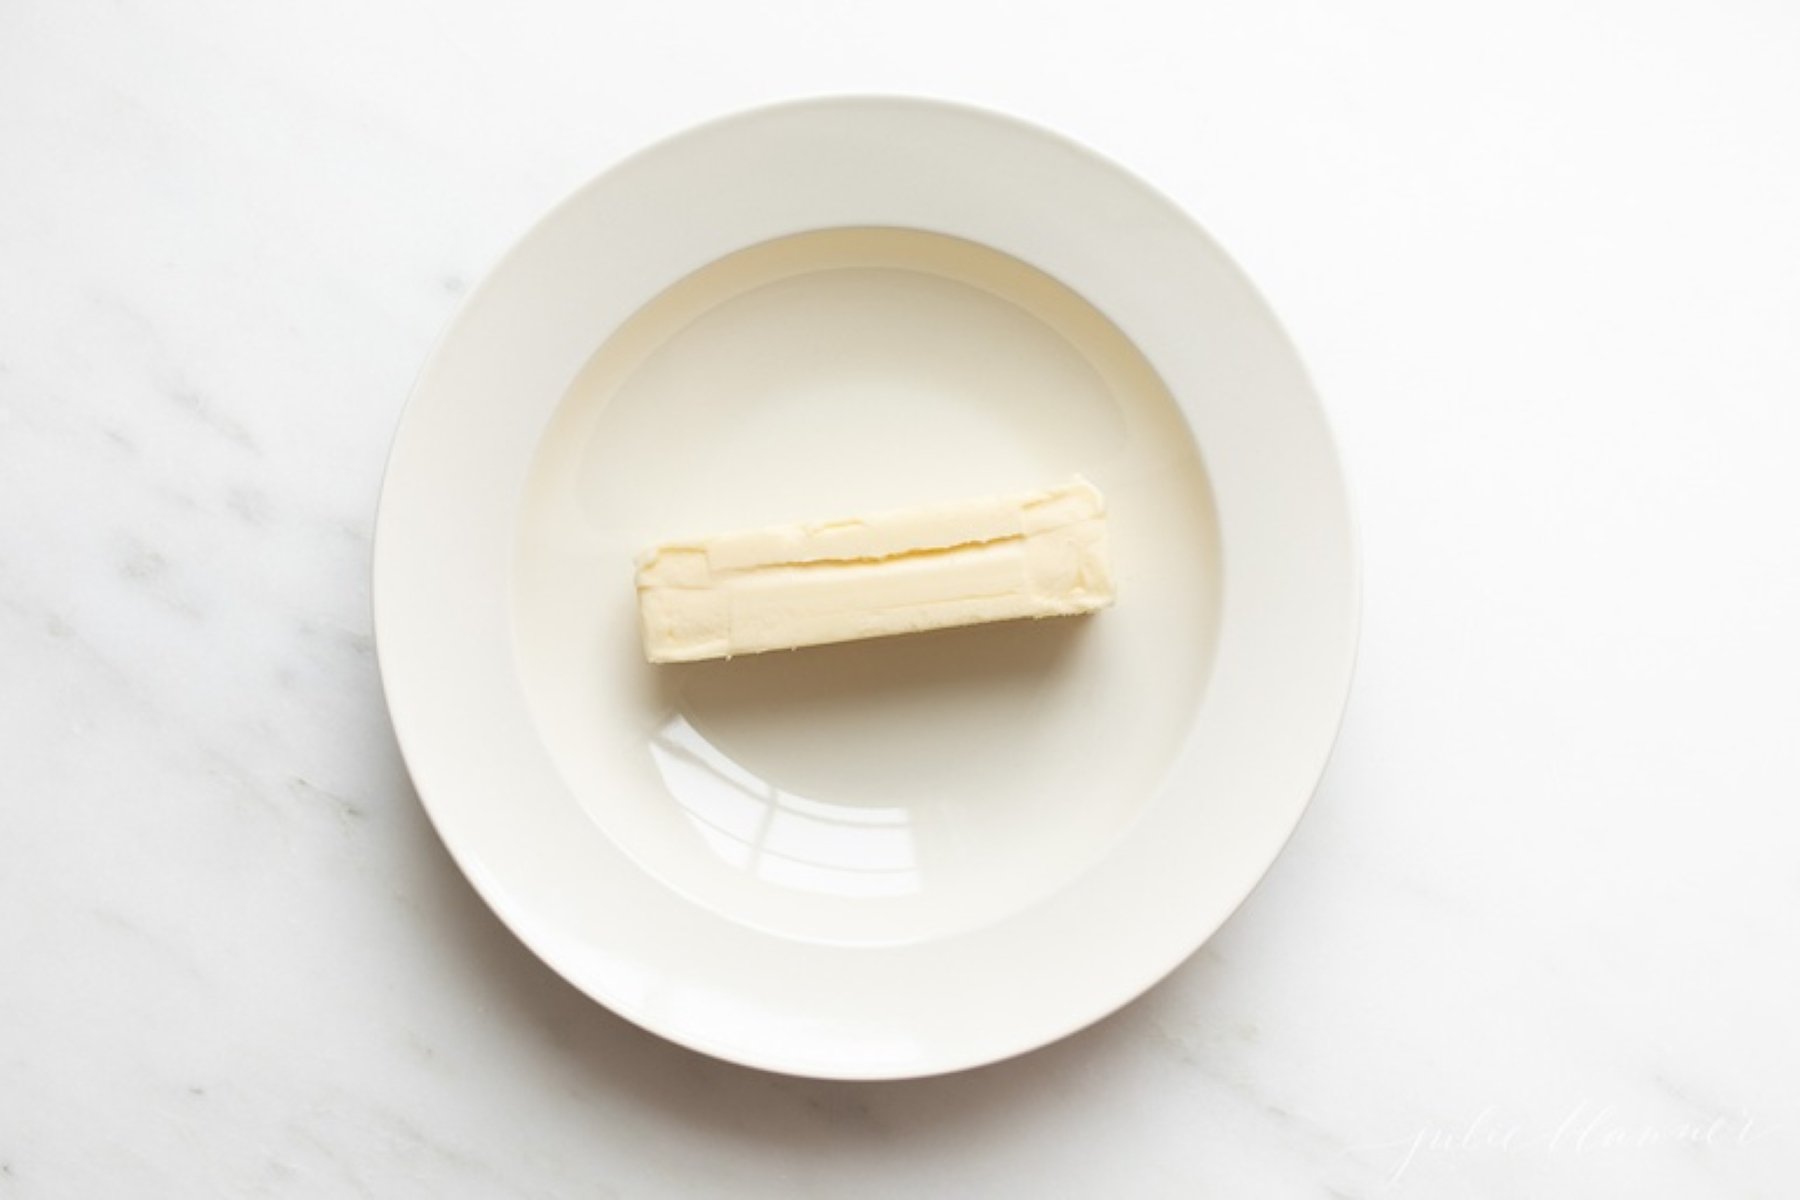 A single stick of butter on a white plate.